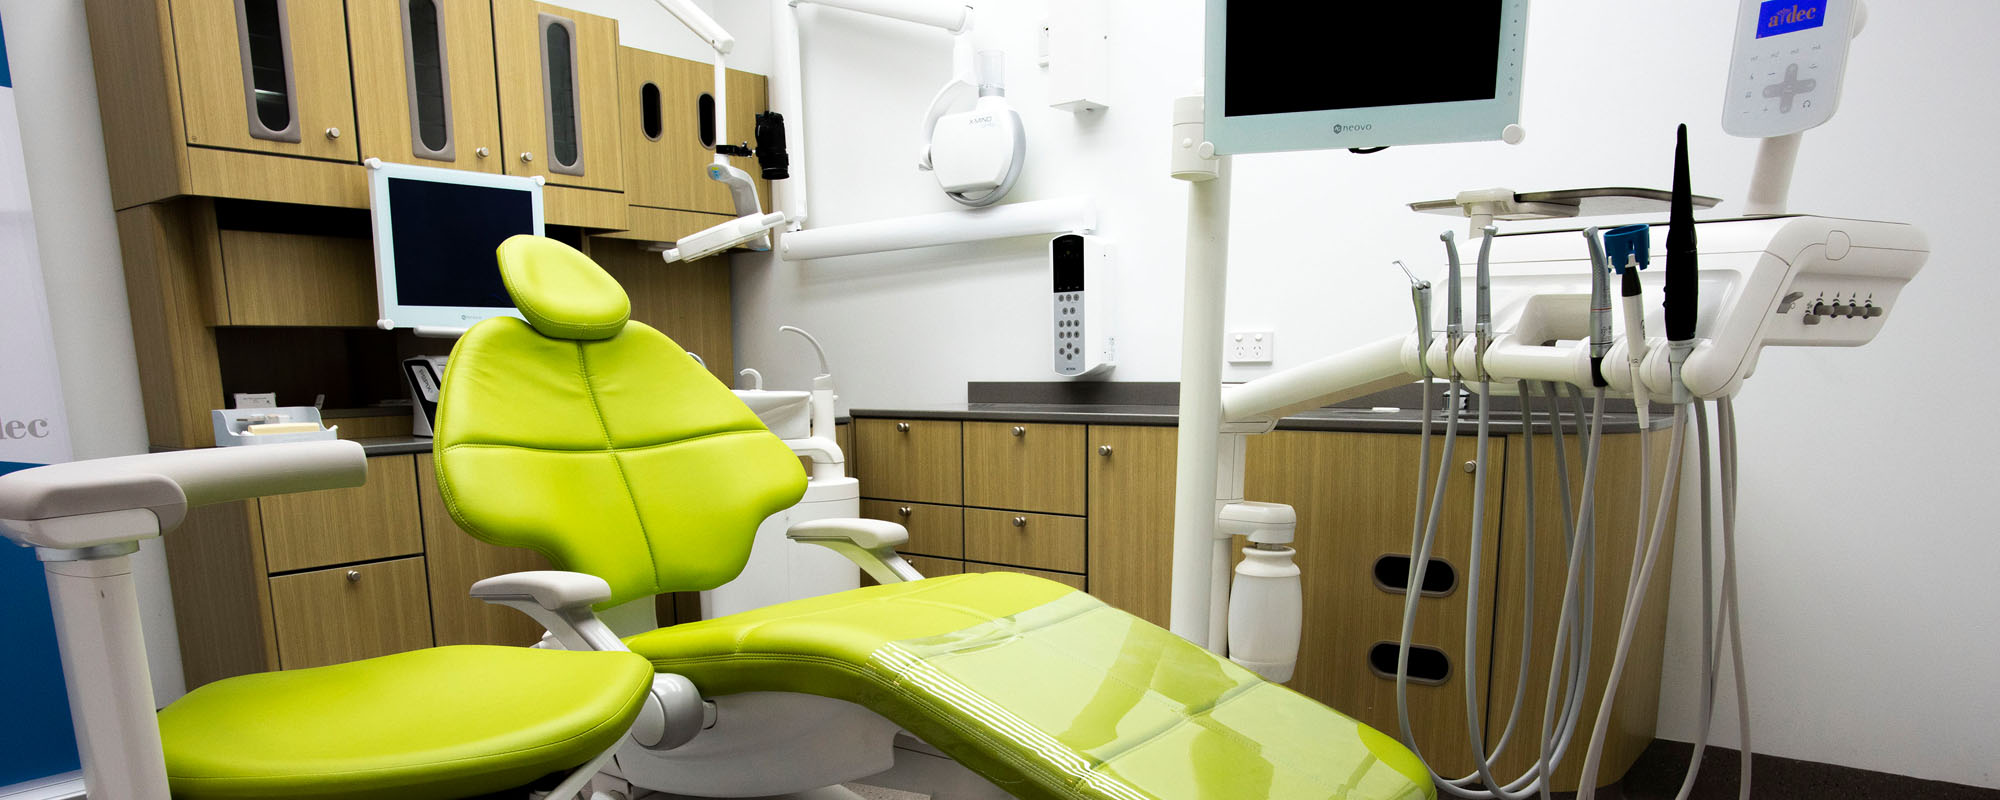 Complete service for all your dental equipment